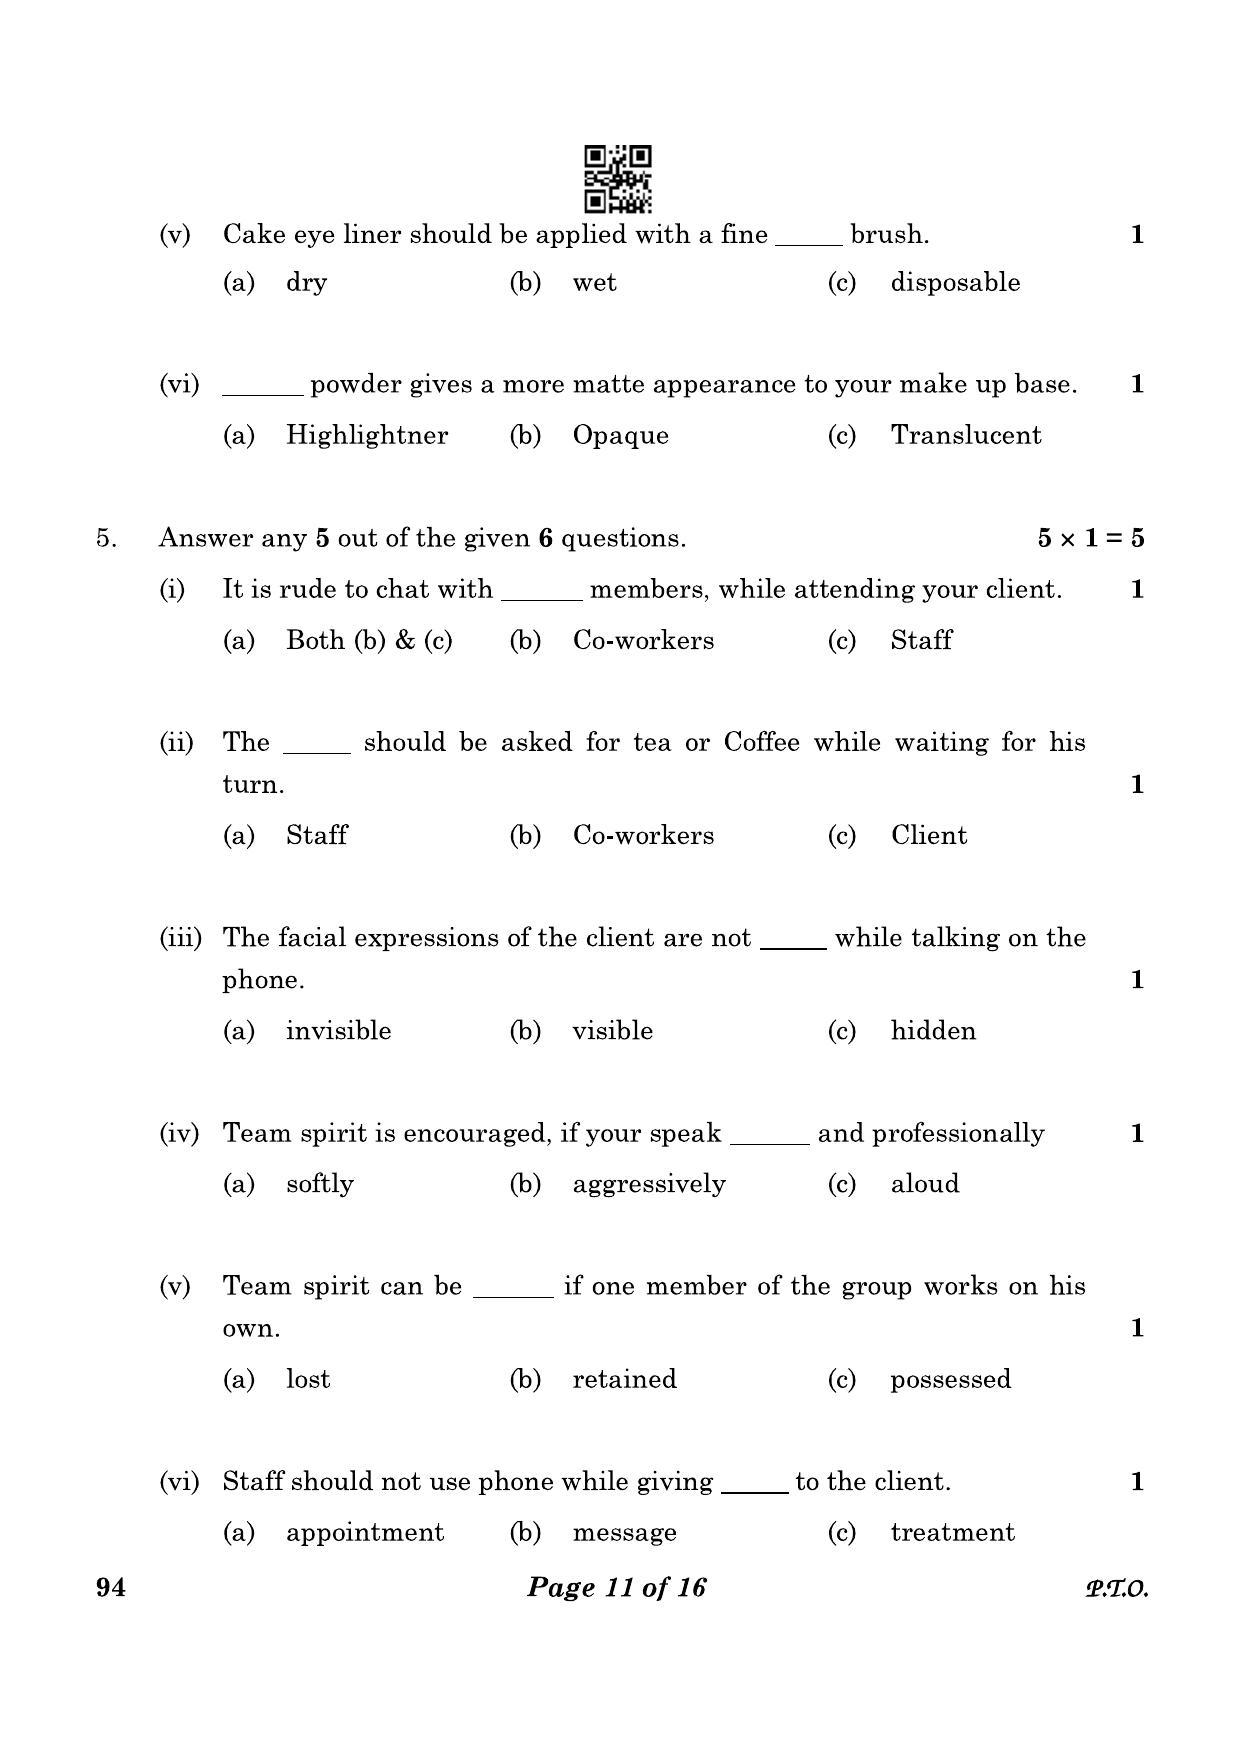 CBSE Class 10 94 Beauty And Wellness 2023 Question Paper - Page 11